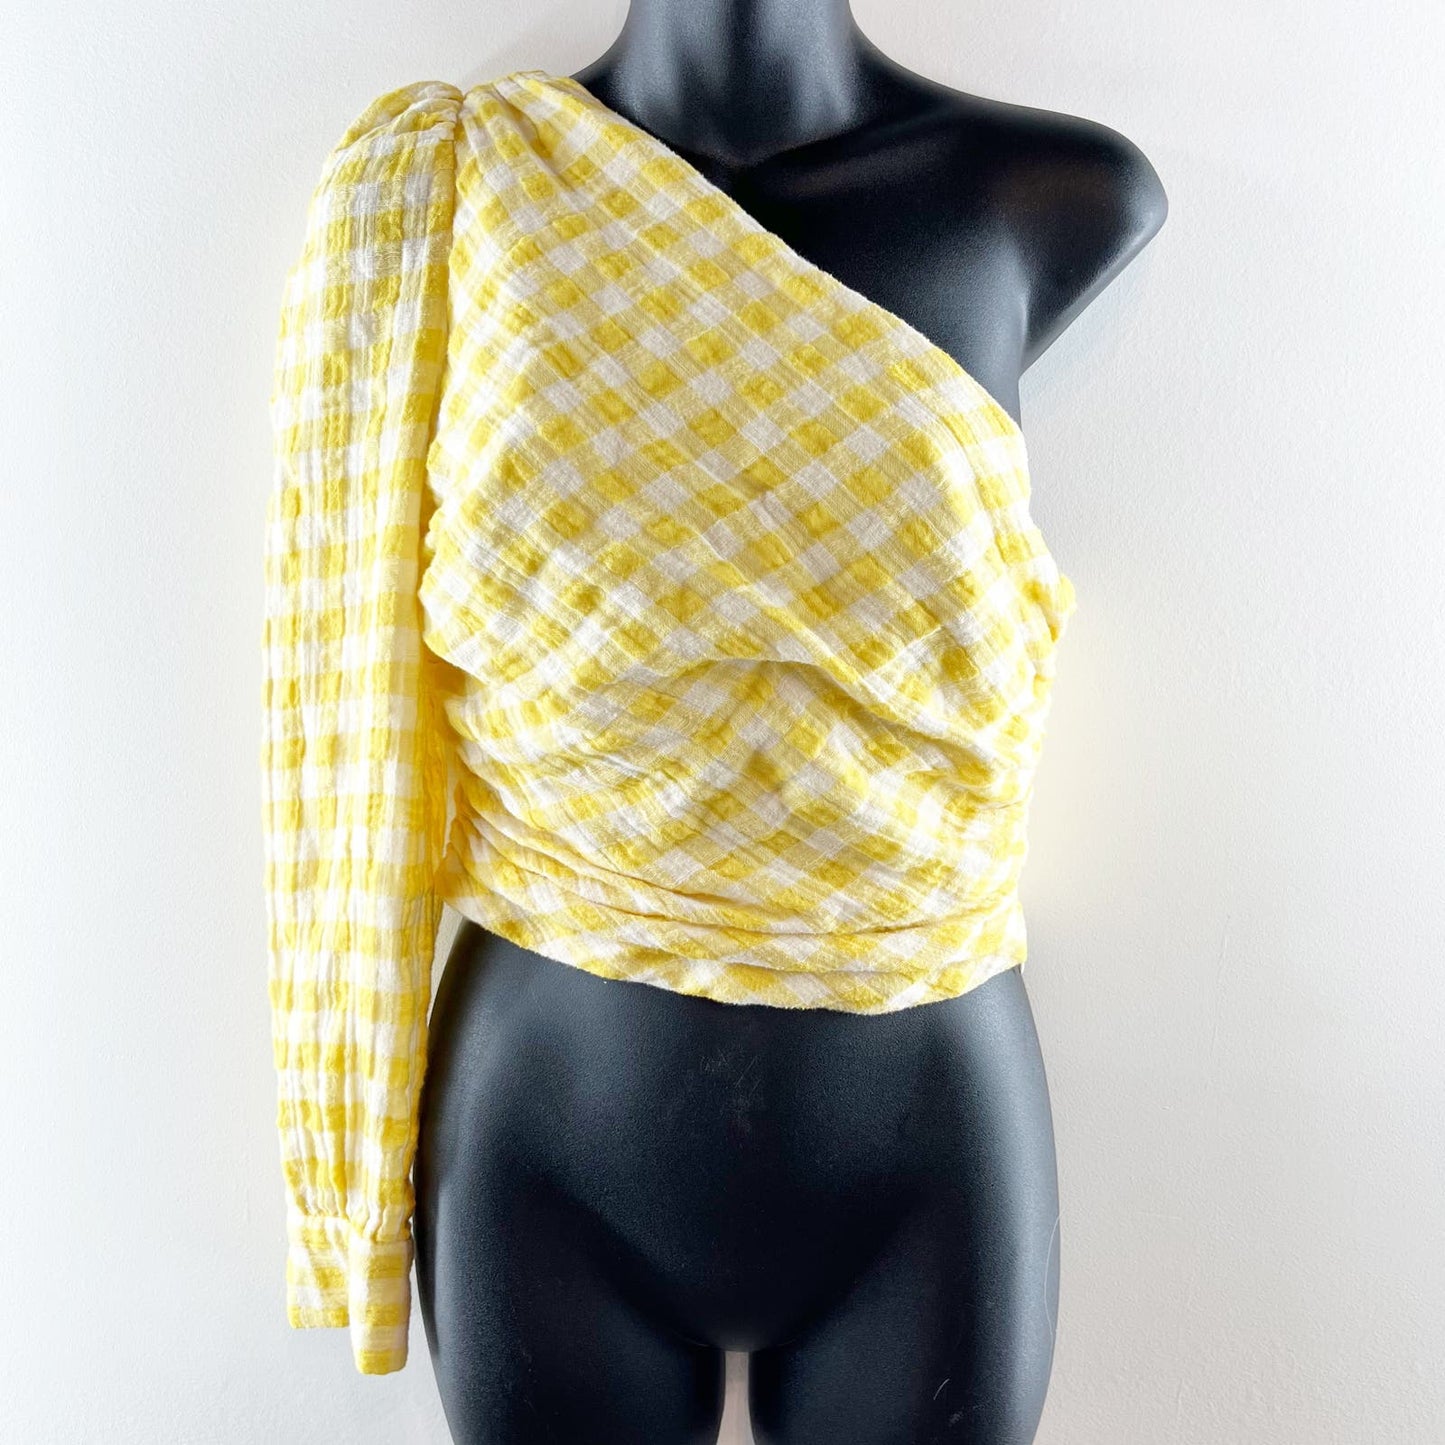 ZARA One Shoulder Gingham Plaid Cropped Top Butter Yellow Medium